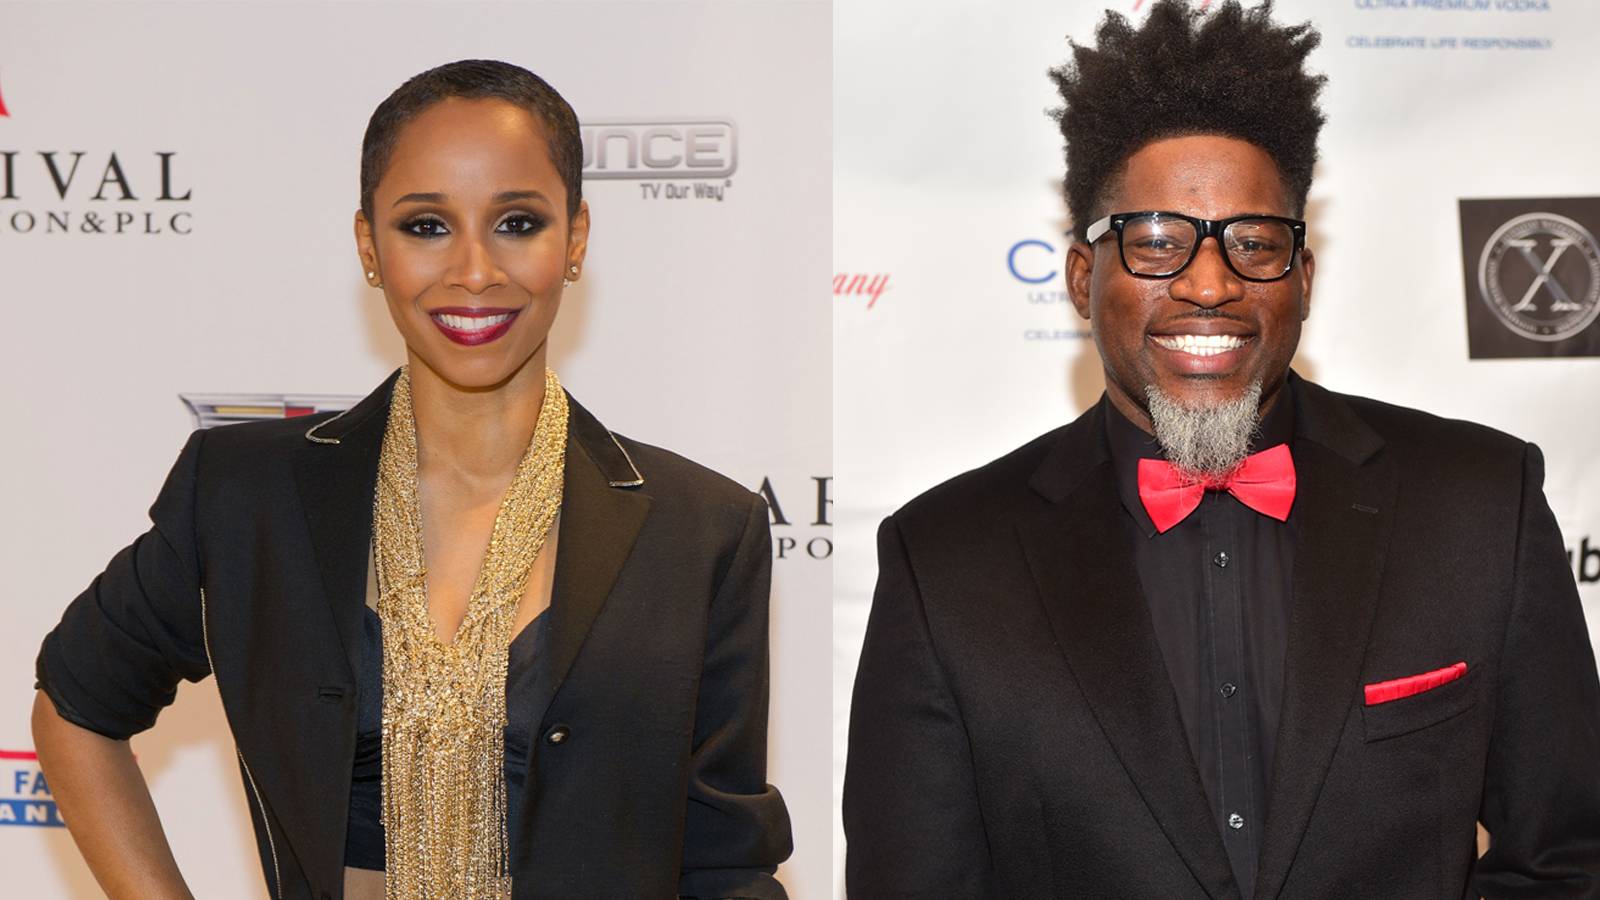 Get to Know: David Banner and Vivian Green - David Banner and Vivian Green will share their stories with Lift Every Voice this Sunday at 10A/9C! (Photos from left: Marcus Ingram/Getty Images, Prince Williams/FilmMagic)&nbsp;